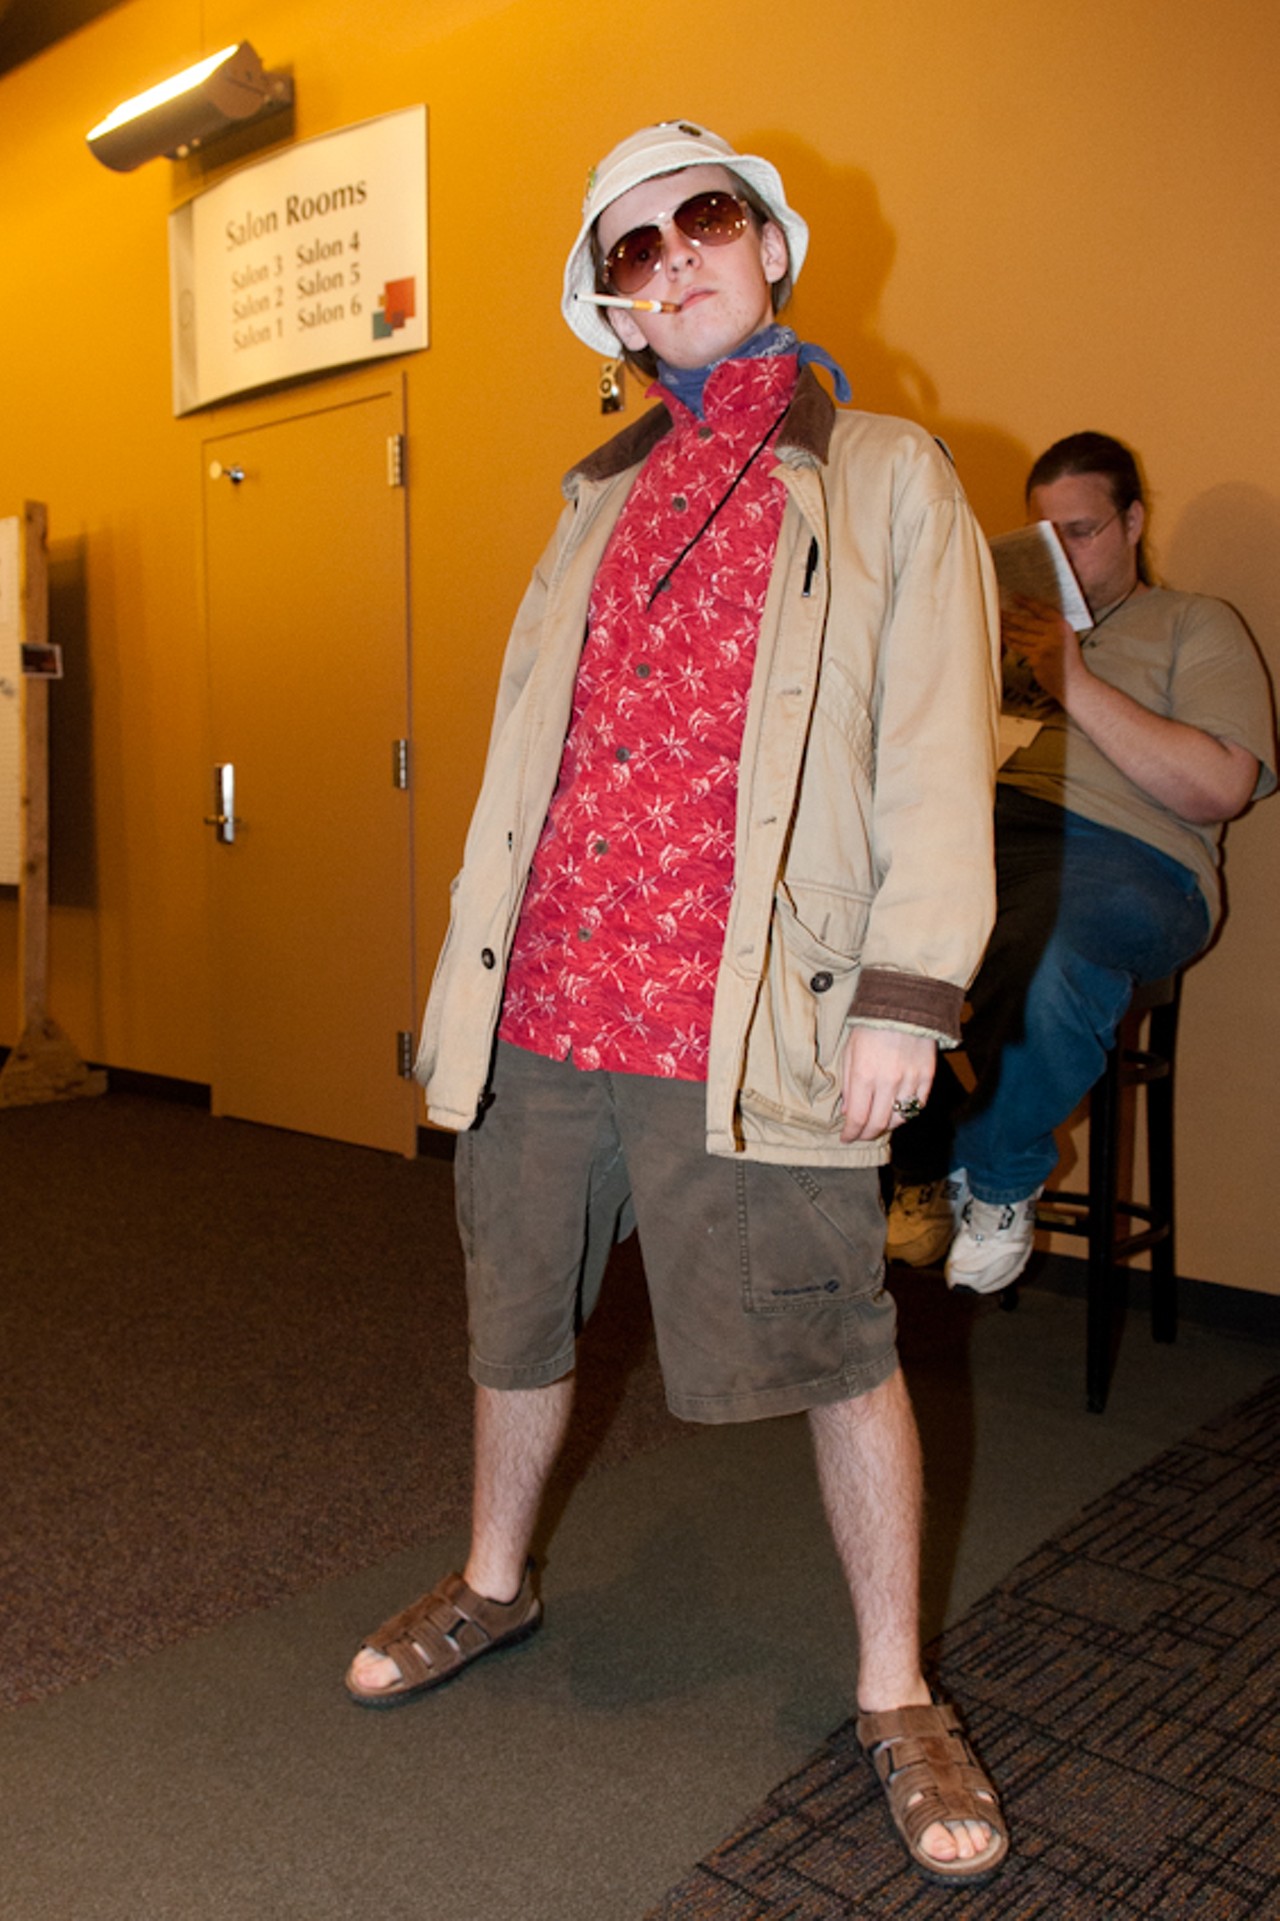 An Archon attendee delivering a spot on Hunter S. Thompson in the Gateway Center on September 30, 2011.